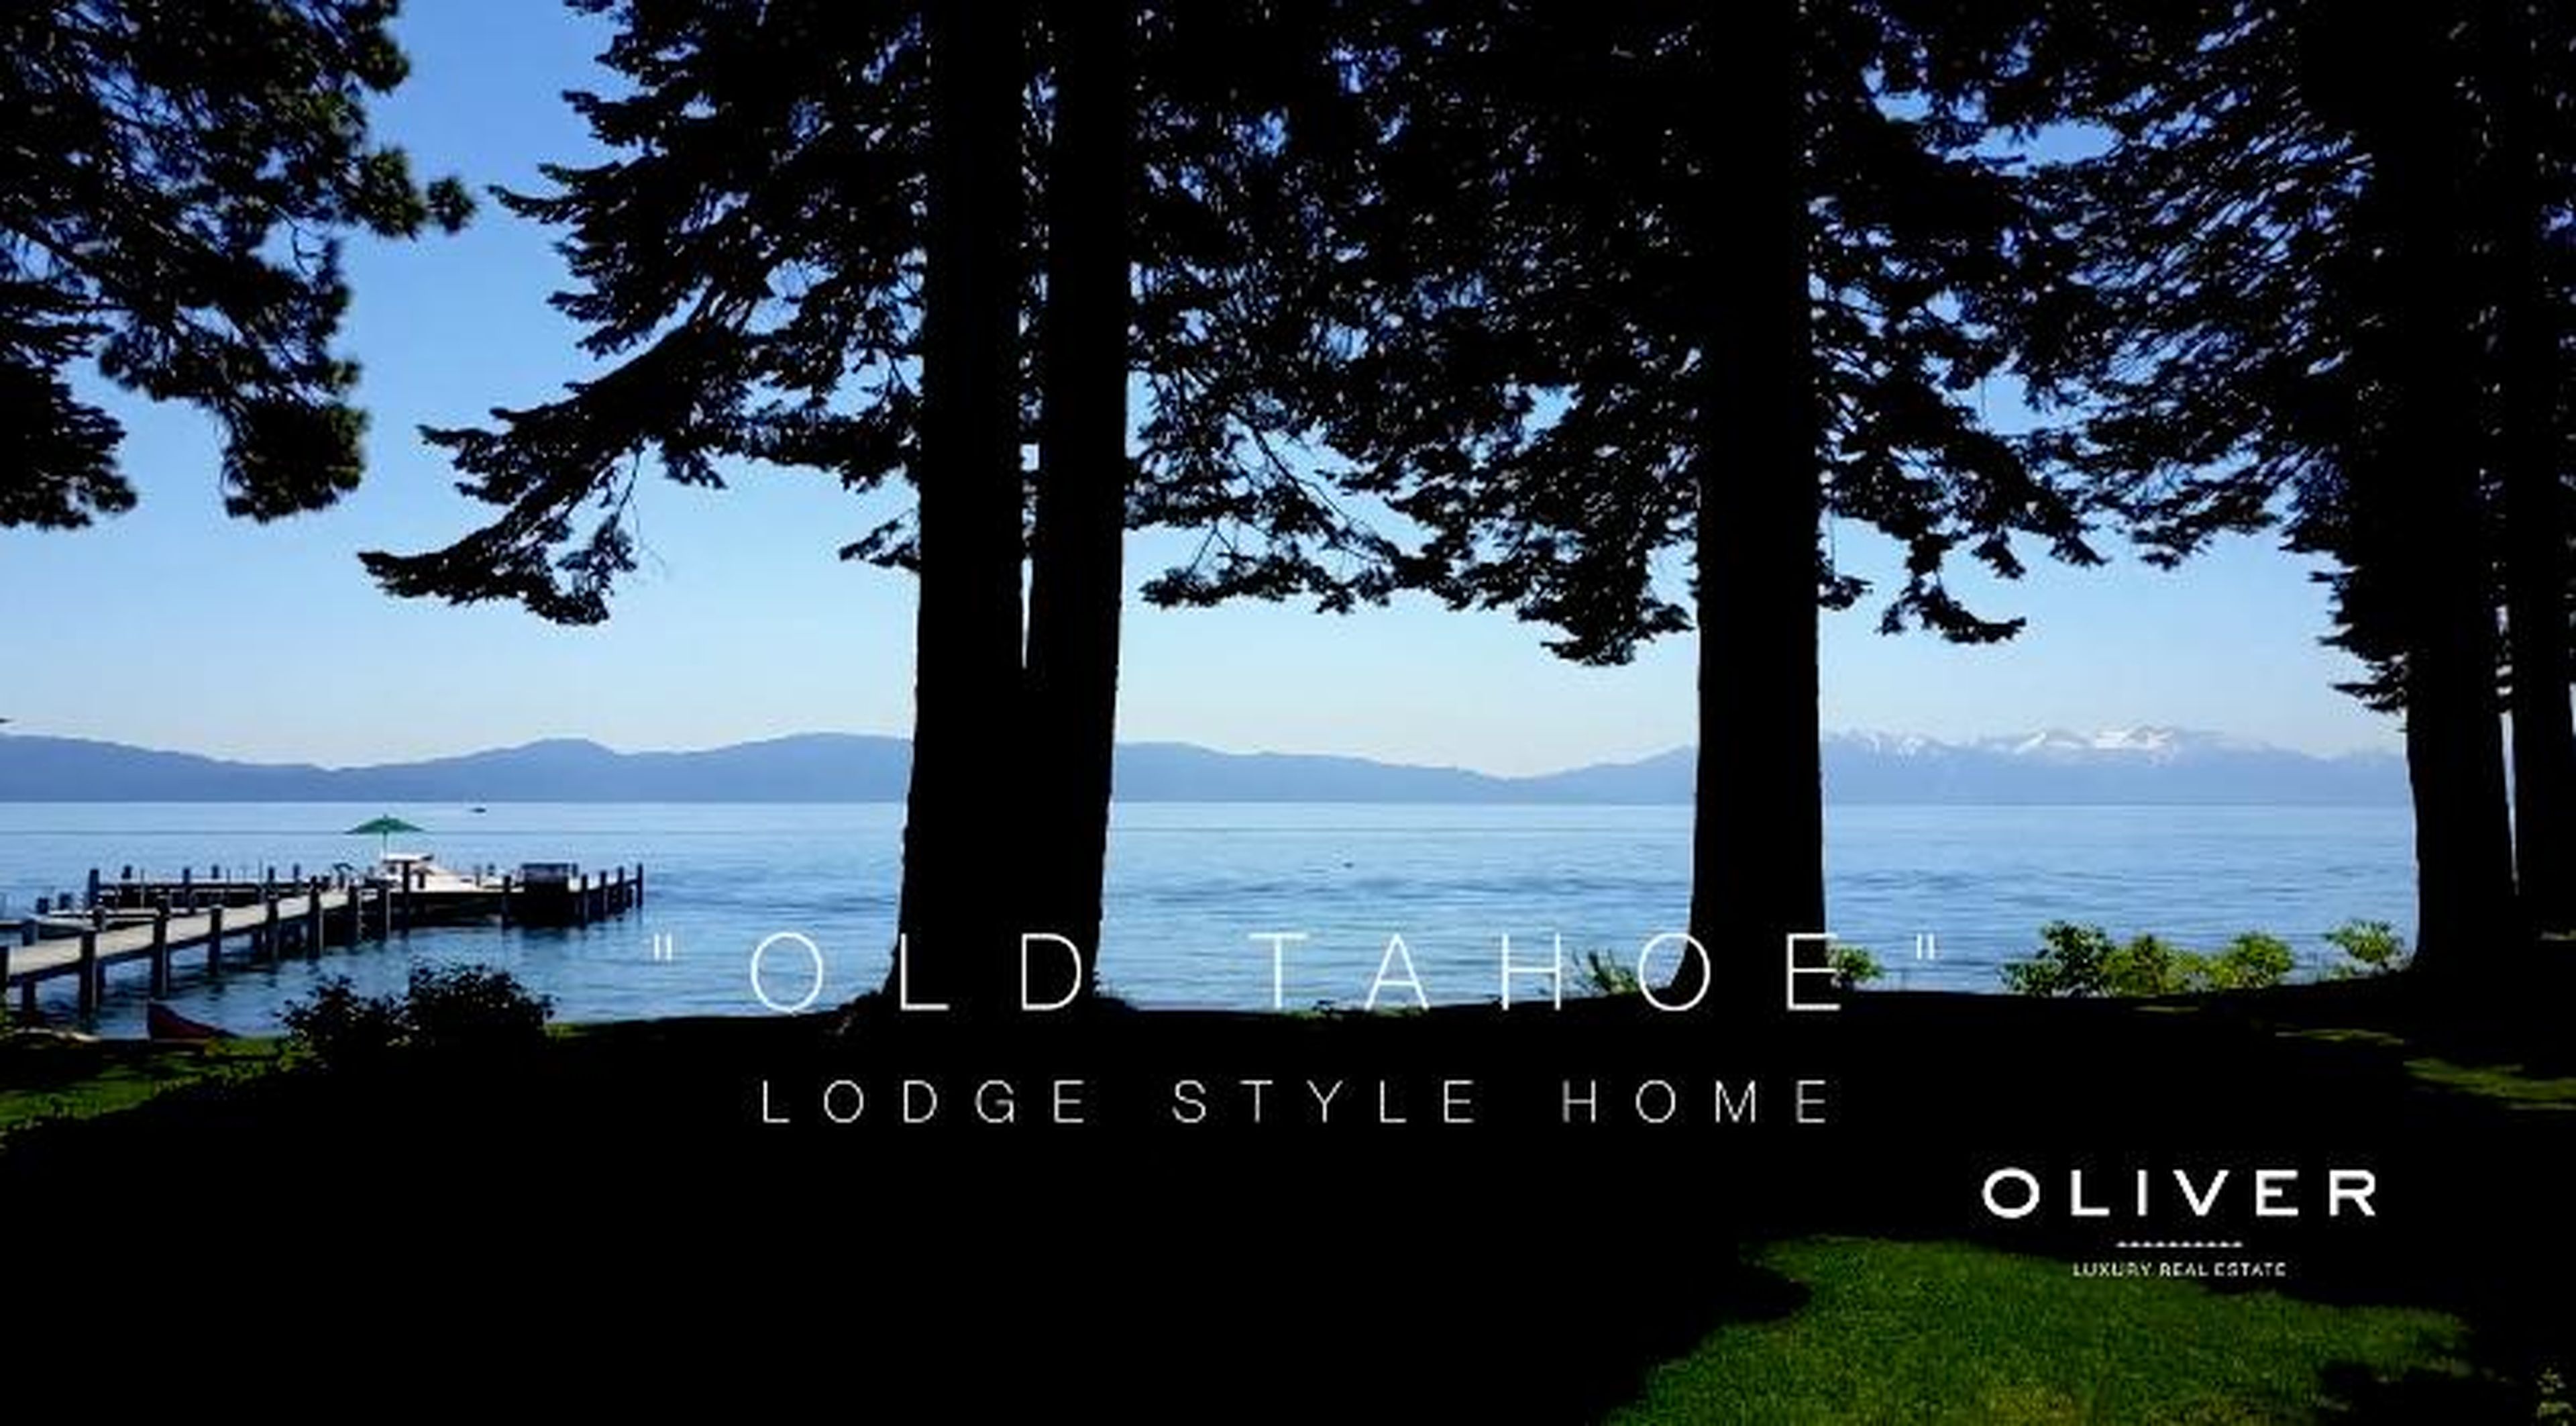 Promo materials for the property say it "exudes 'Old Tahoe' ambiance."